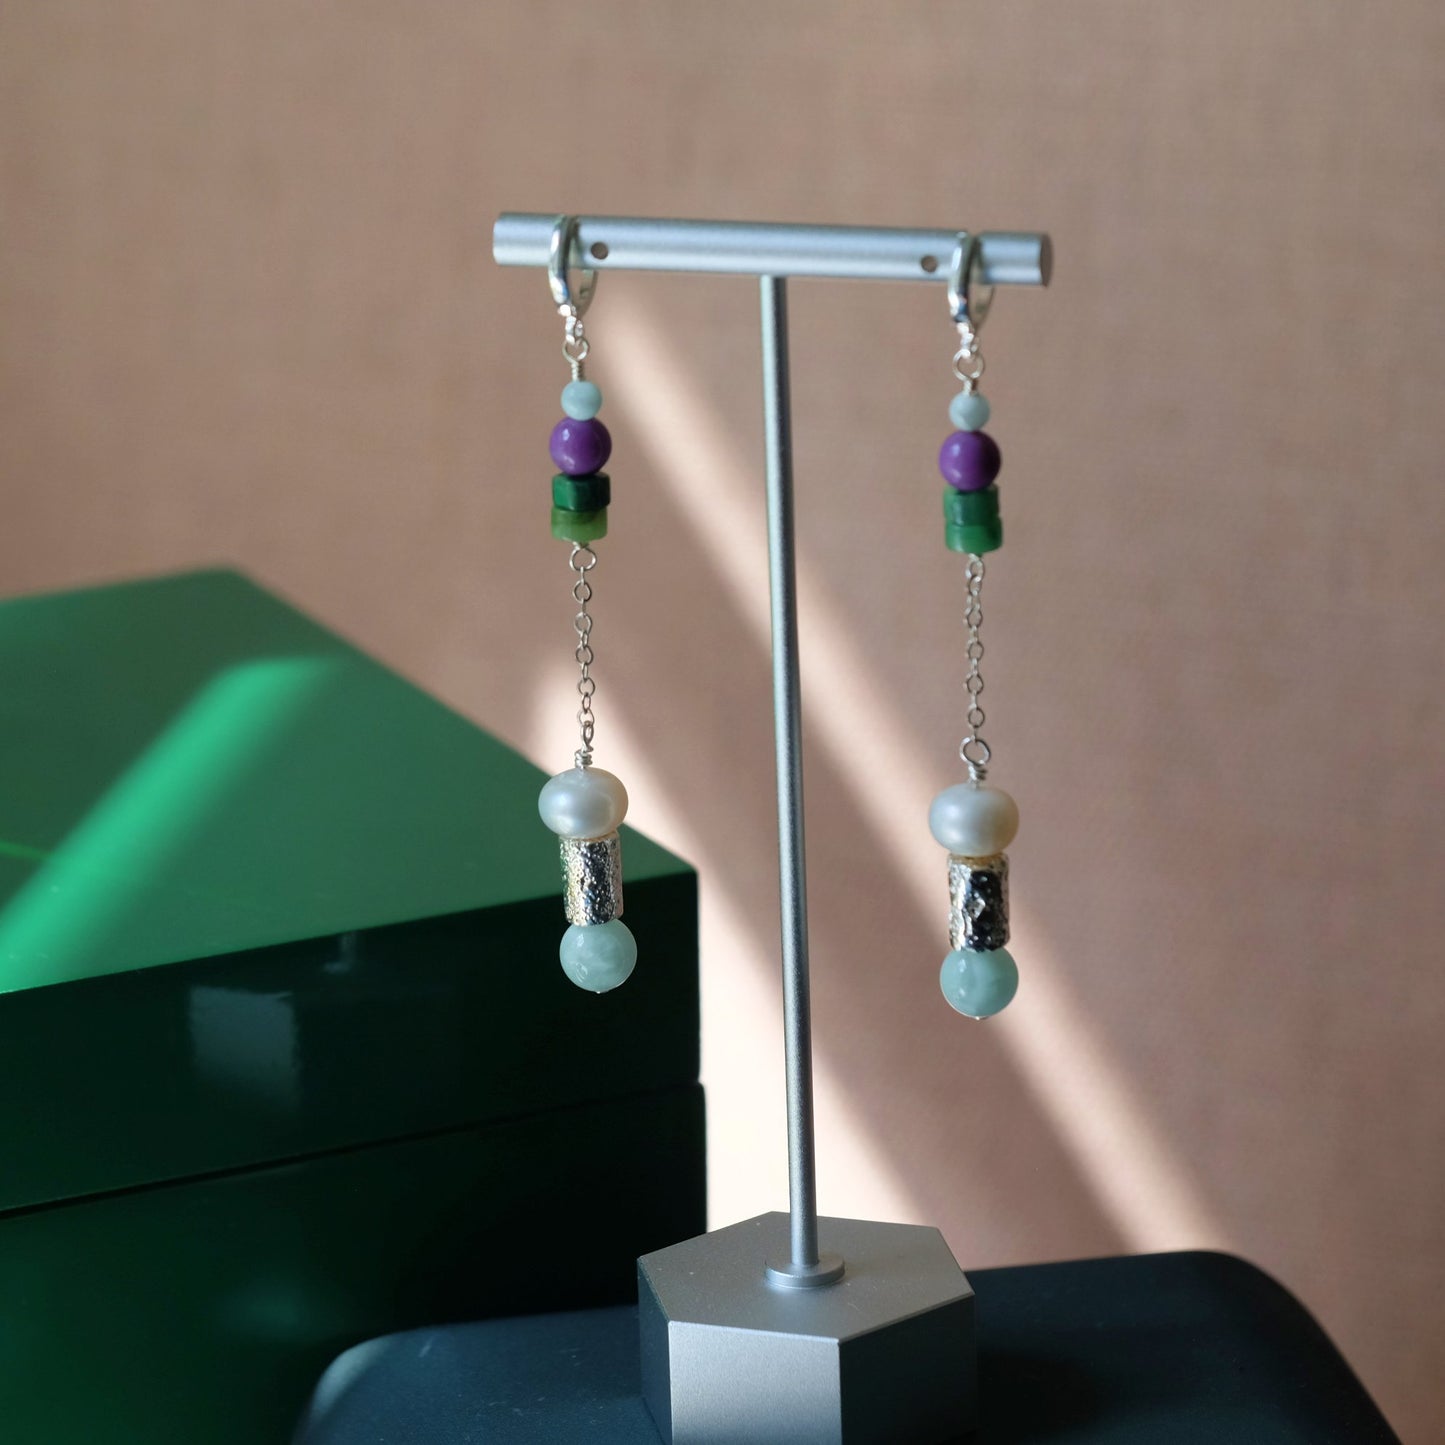 Dangle Earrings with Pearls, Jade and Moonstone